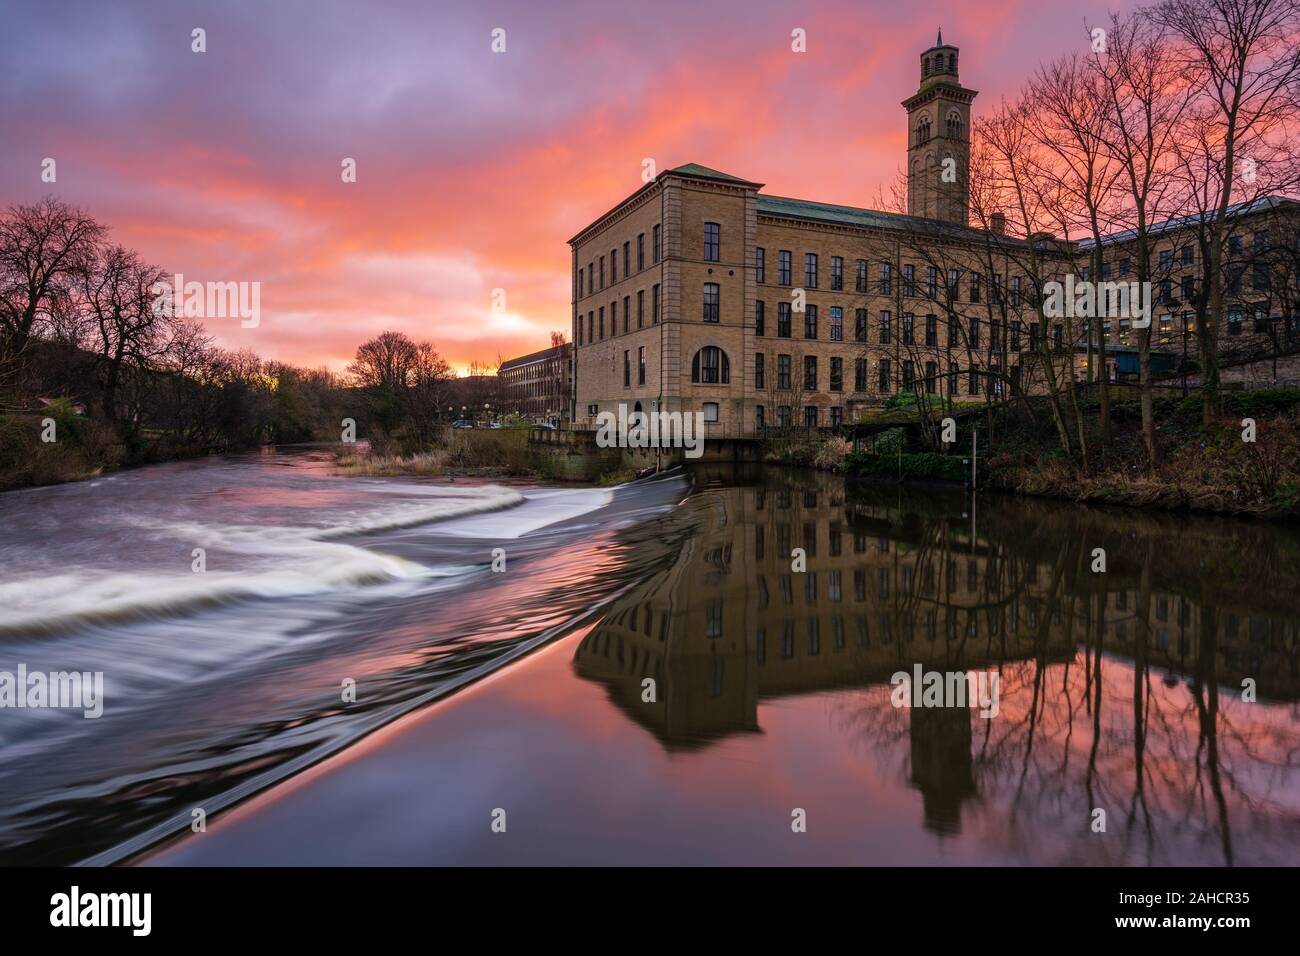 A vibrant sunrise frames New Mill at the Saltaire UNESCO World Heritage Site, with the distinctive architecture reflected in the River Aire. Stock Photo